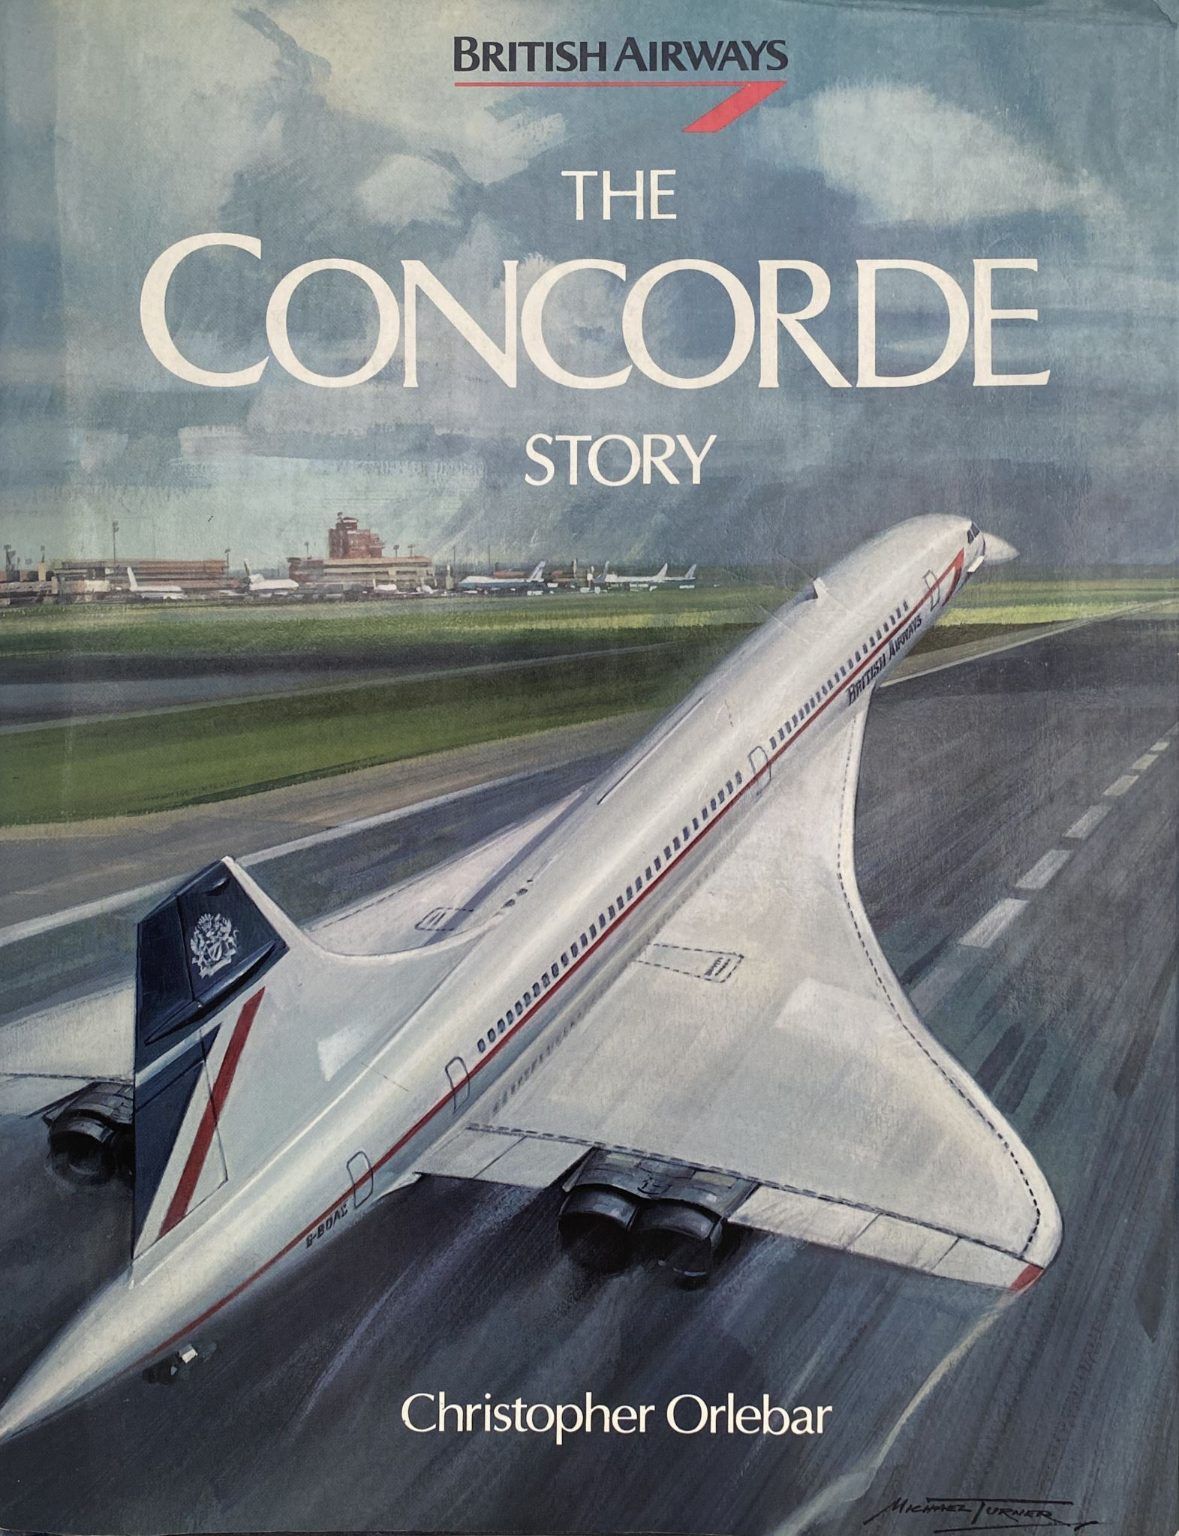 THE CONCORDE STORY